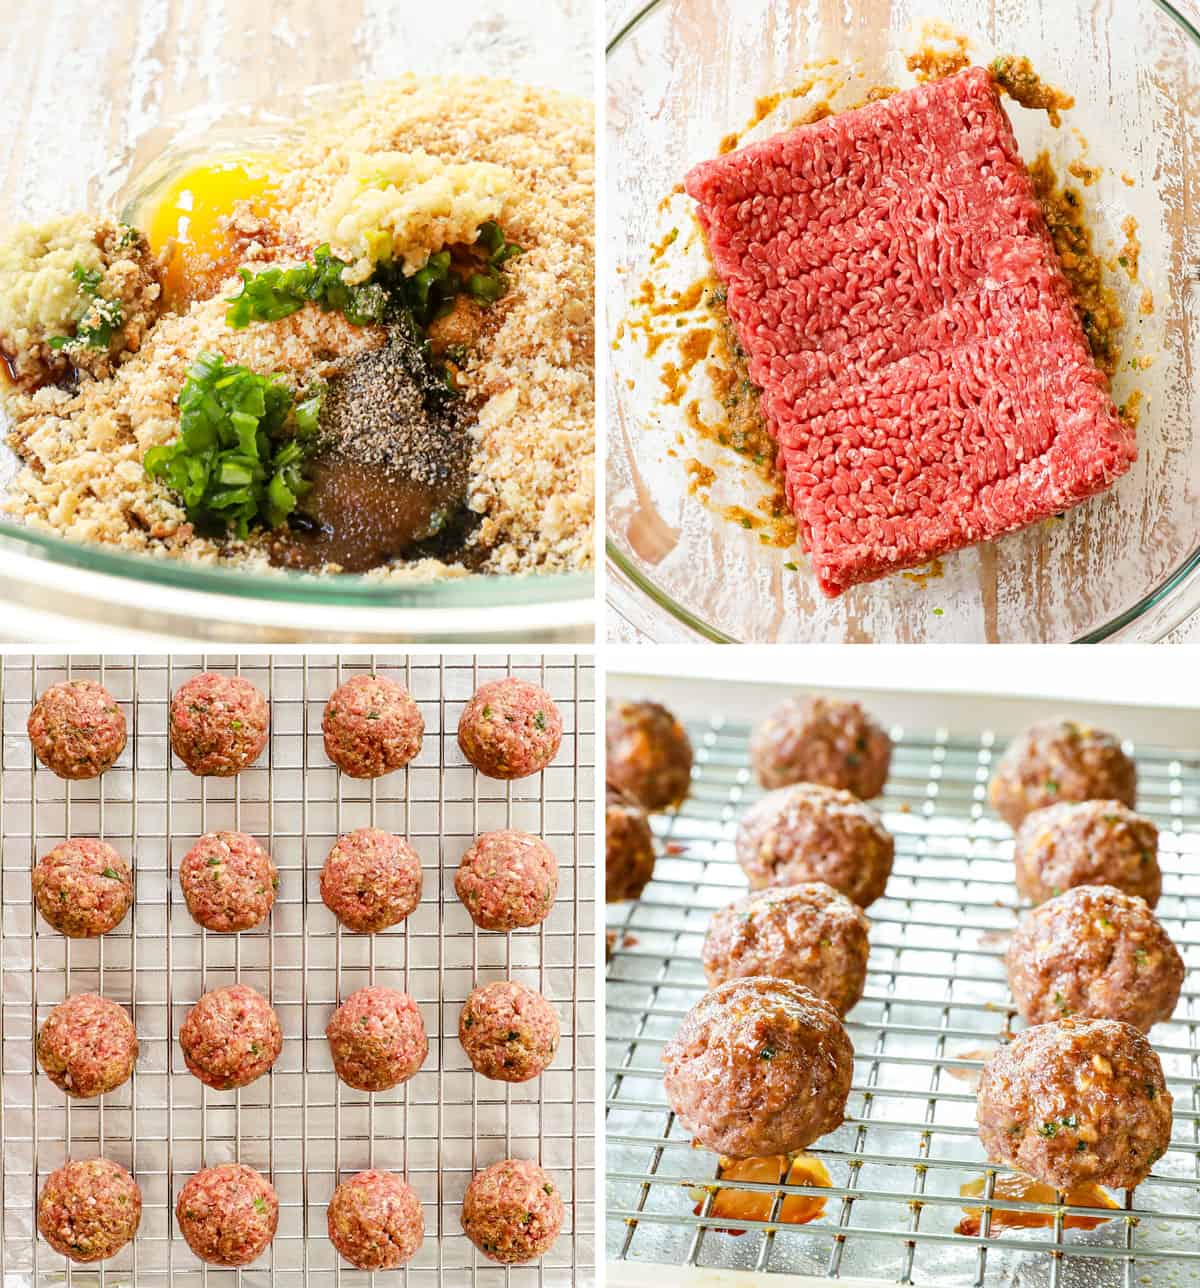 a collage showing how to make Asian meatballs by 1) whisking together eggs, breadcrumbs, ginger, garlic and green onions, 2) mixing in beef, 3) forming into meatballs, 4) baking the Asian meatball recipe